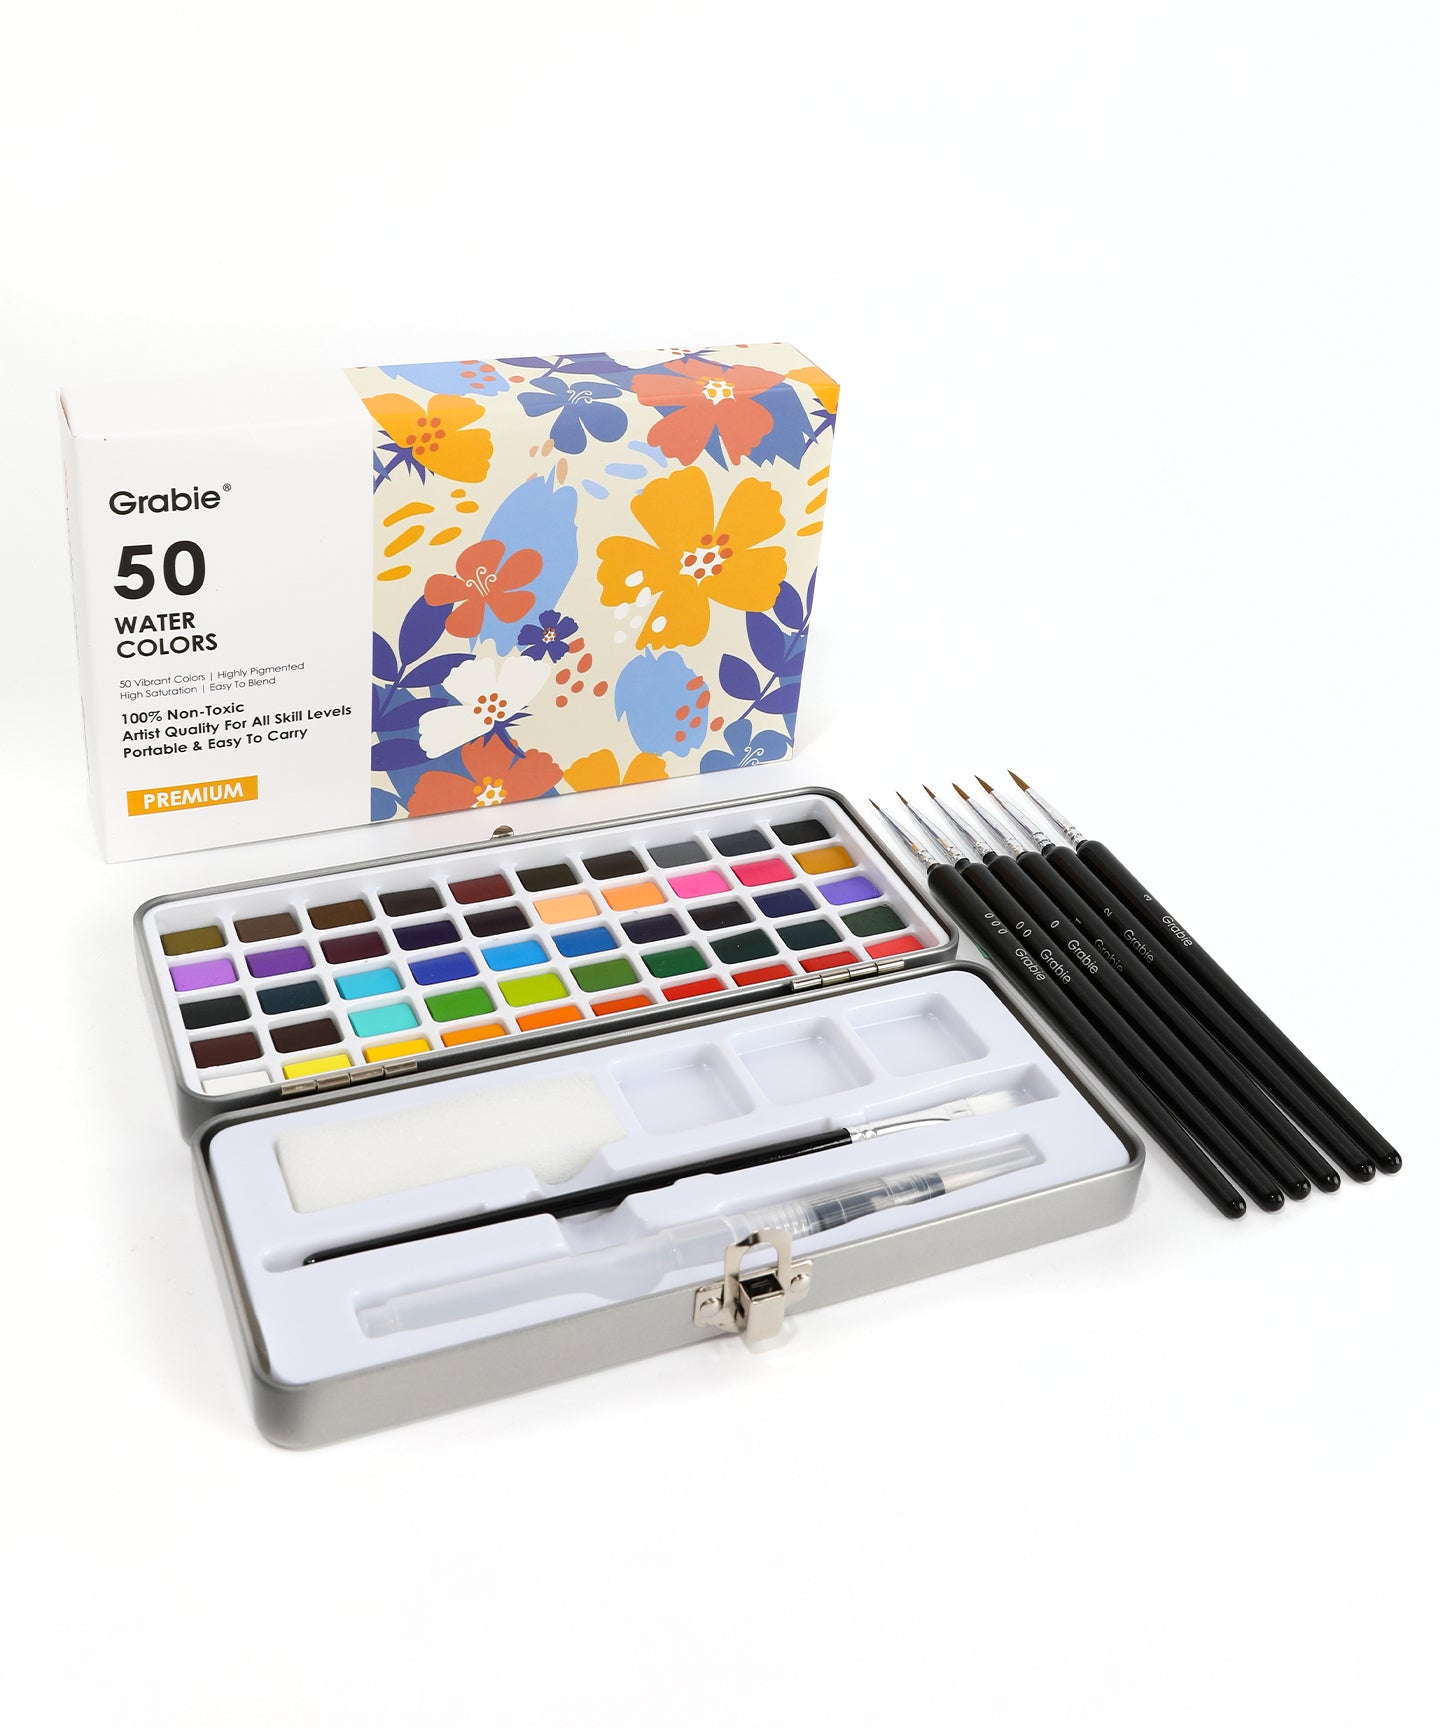 Grabie Watercolor Paint Set, Great for Painting, 50 Cambodia